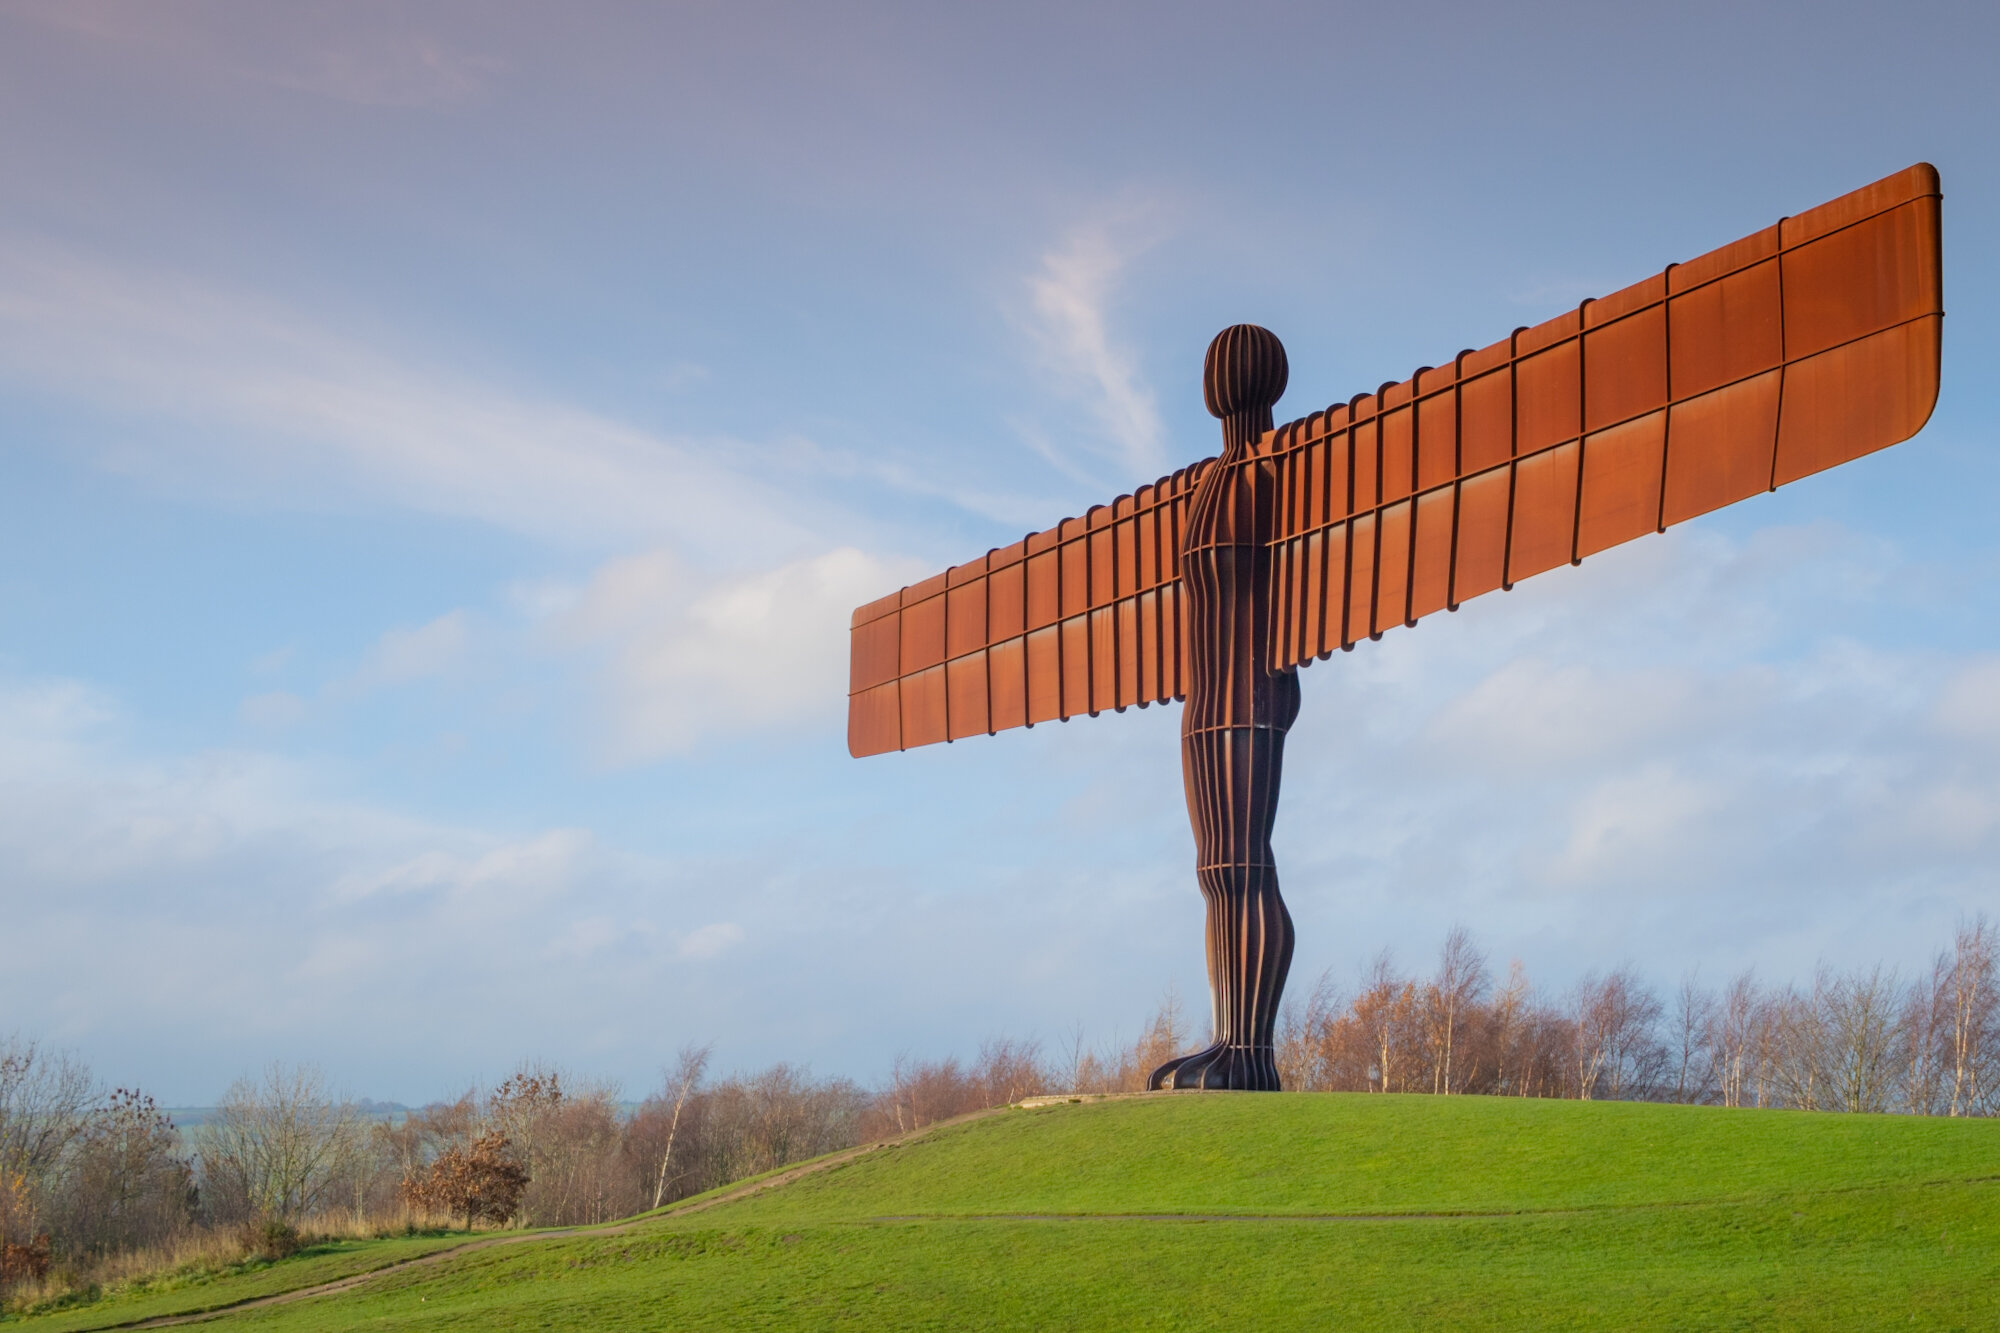 One final shout out for my 2024 calendar to ensure delivery before Christmas for those in the UK. The Angel of the North is one of 12 featured photographs in the calendar - see link in my bio for details.

The Angel of the North is my favourite sculp